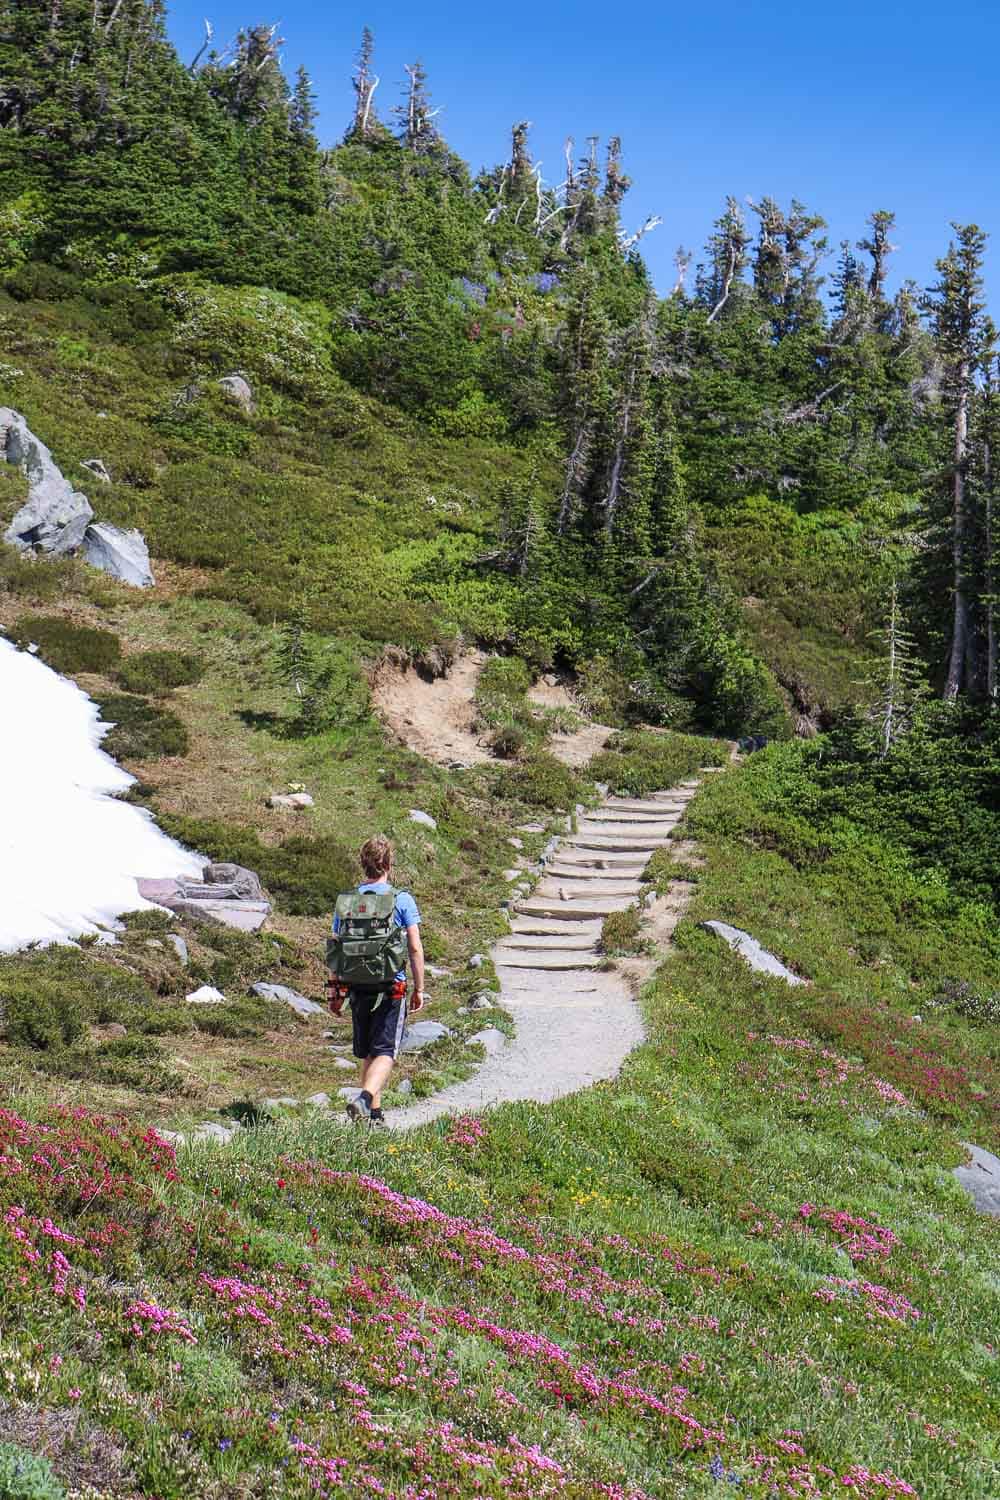 Hiker and wildflowers on the Skyline Trail in Mount Rainier National Park